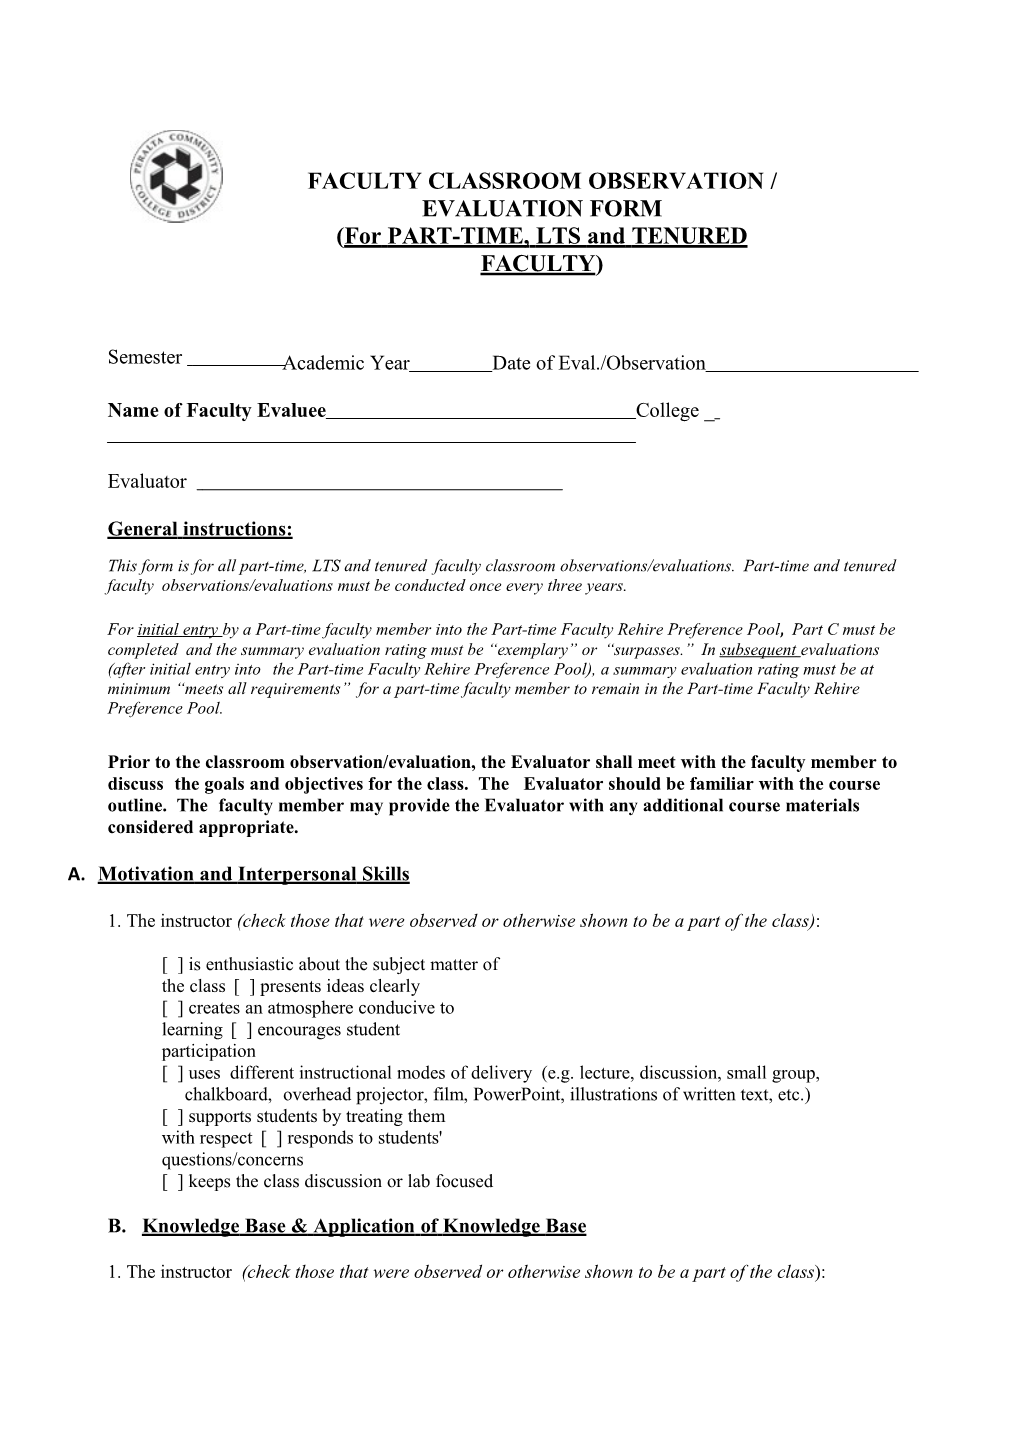 FACULTY CLASSROOM OBSERVATION / EVALUATION FORM (For PART-TIME, LTS and TENURED FACULTY)